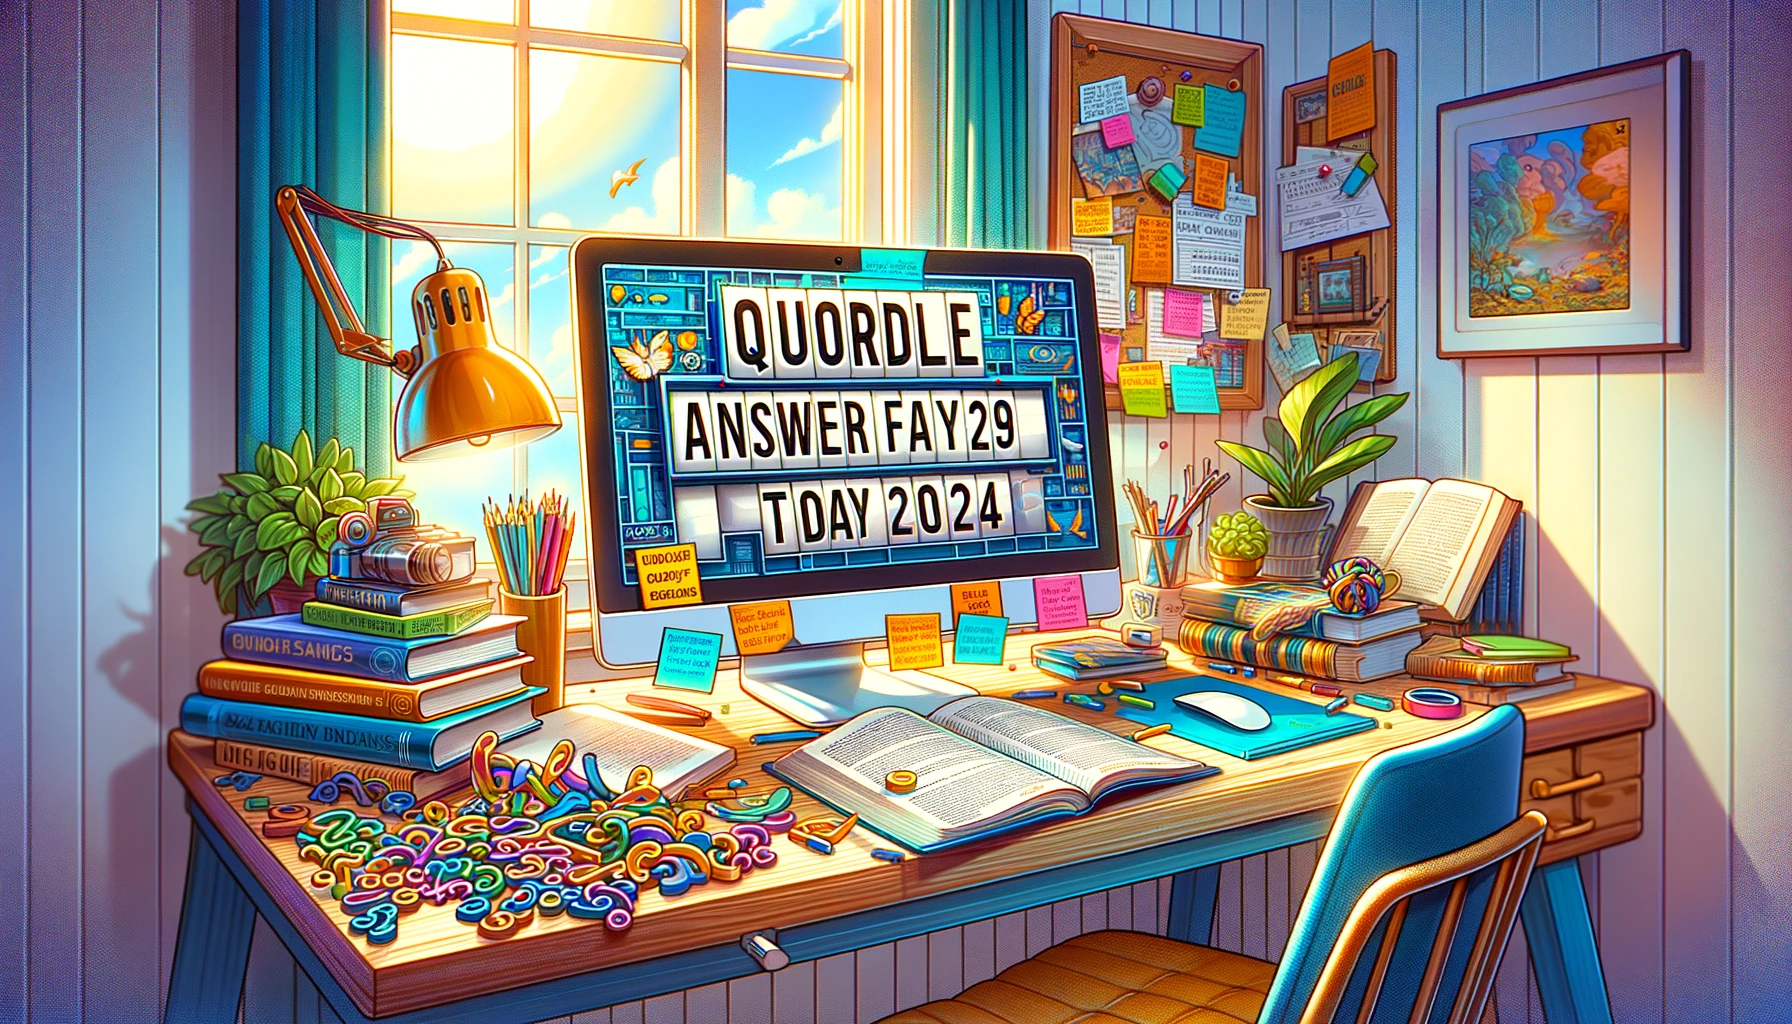 Quordle Answers February 29 Today 2024 (Quordle #765)